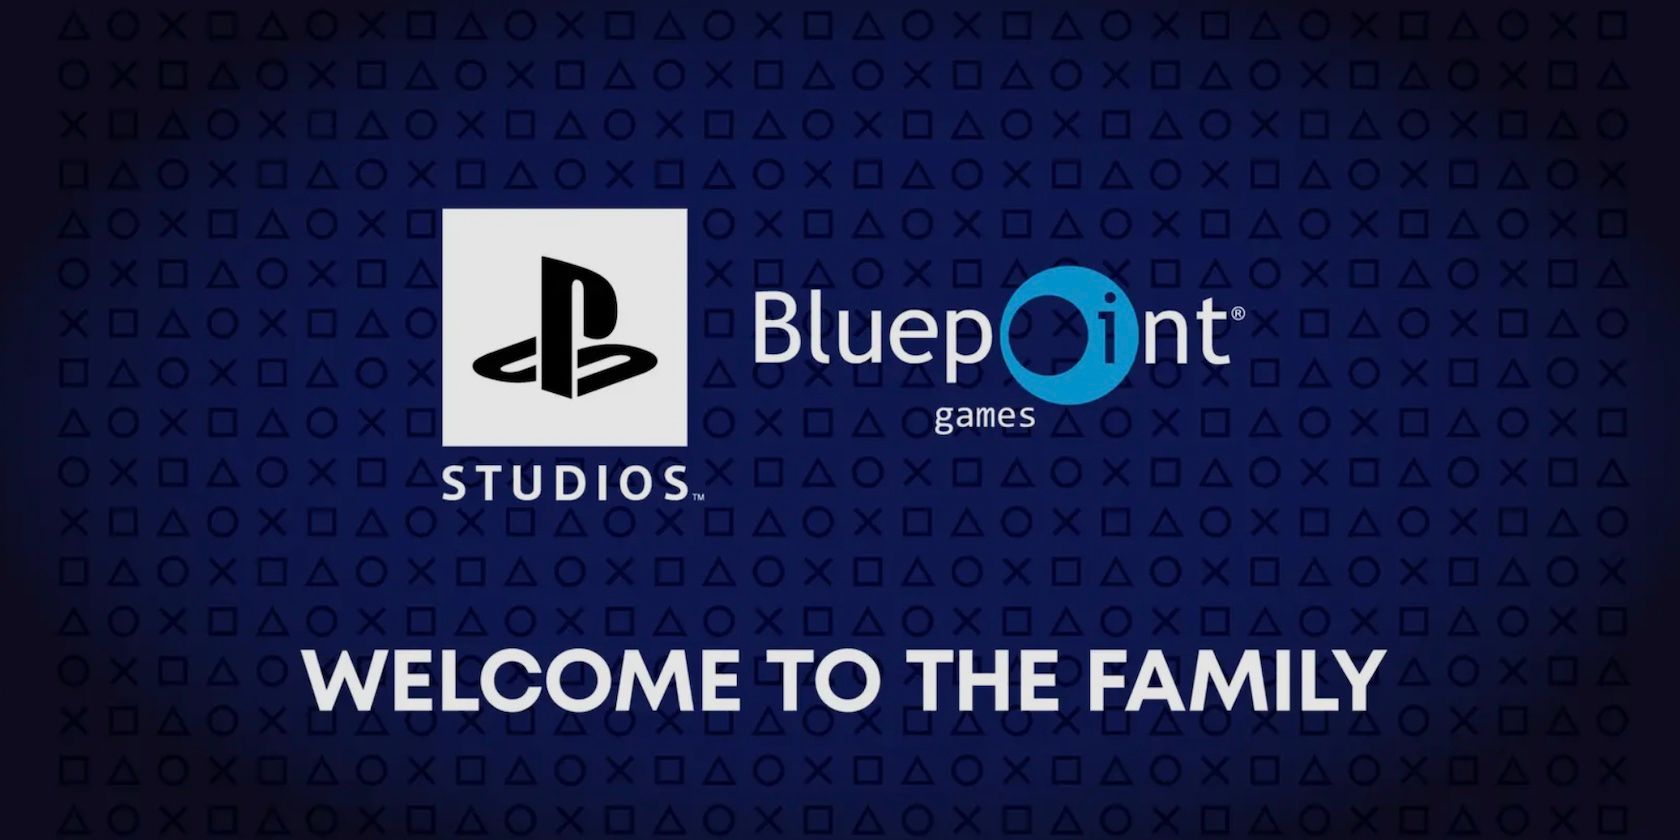 A PlayStation Studios and Bluepoint Games welcome banner saying welcome to the family